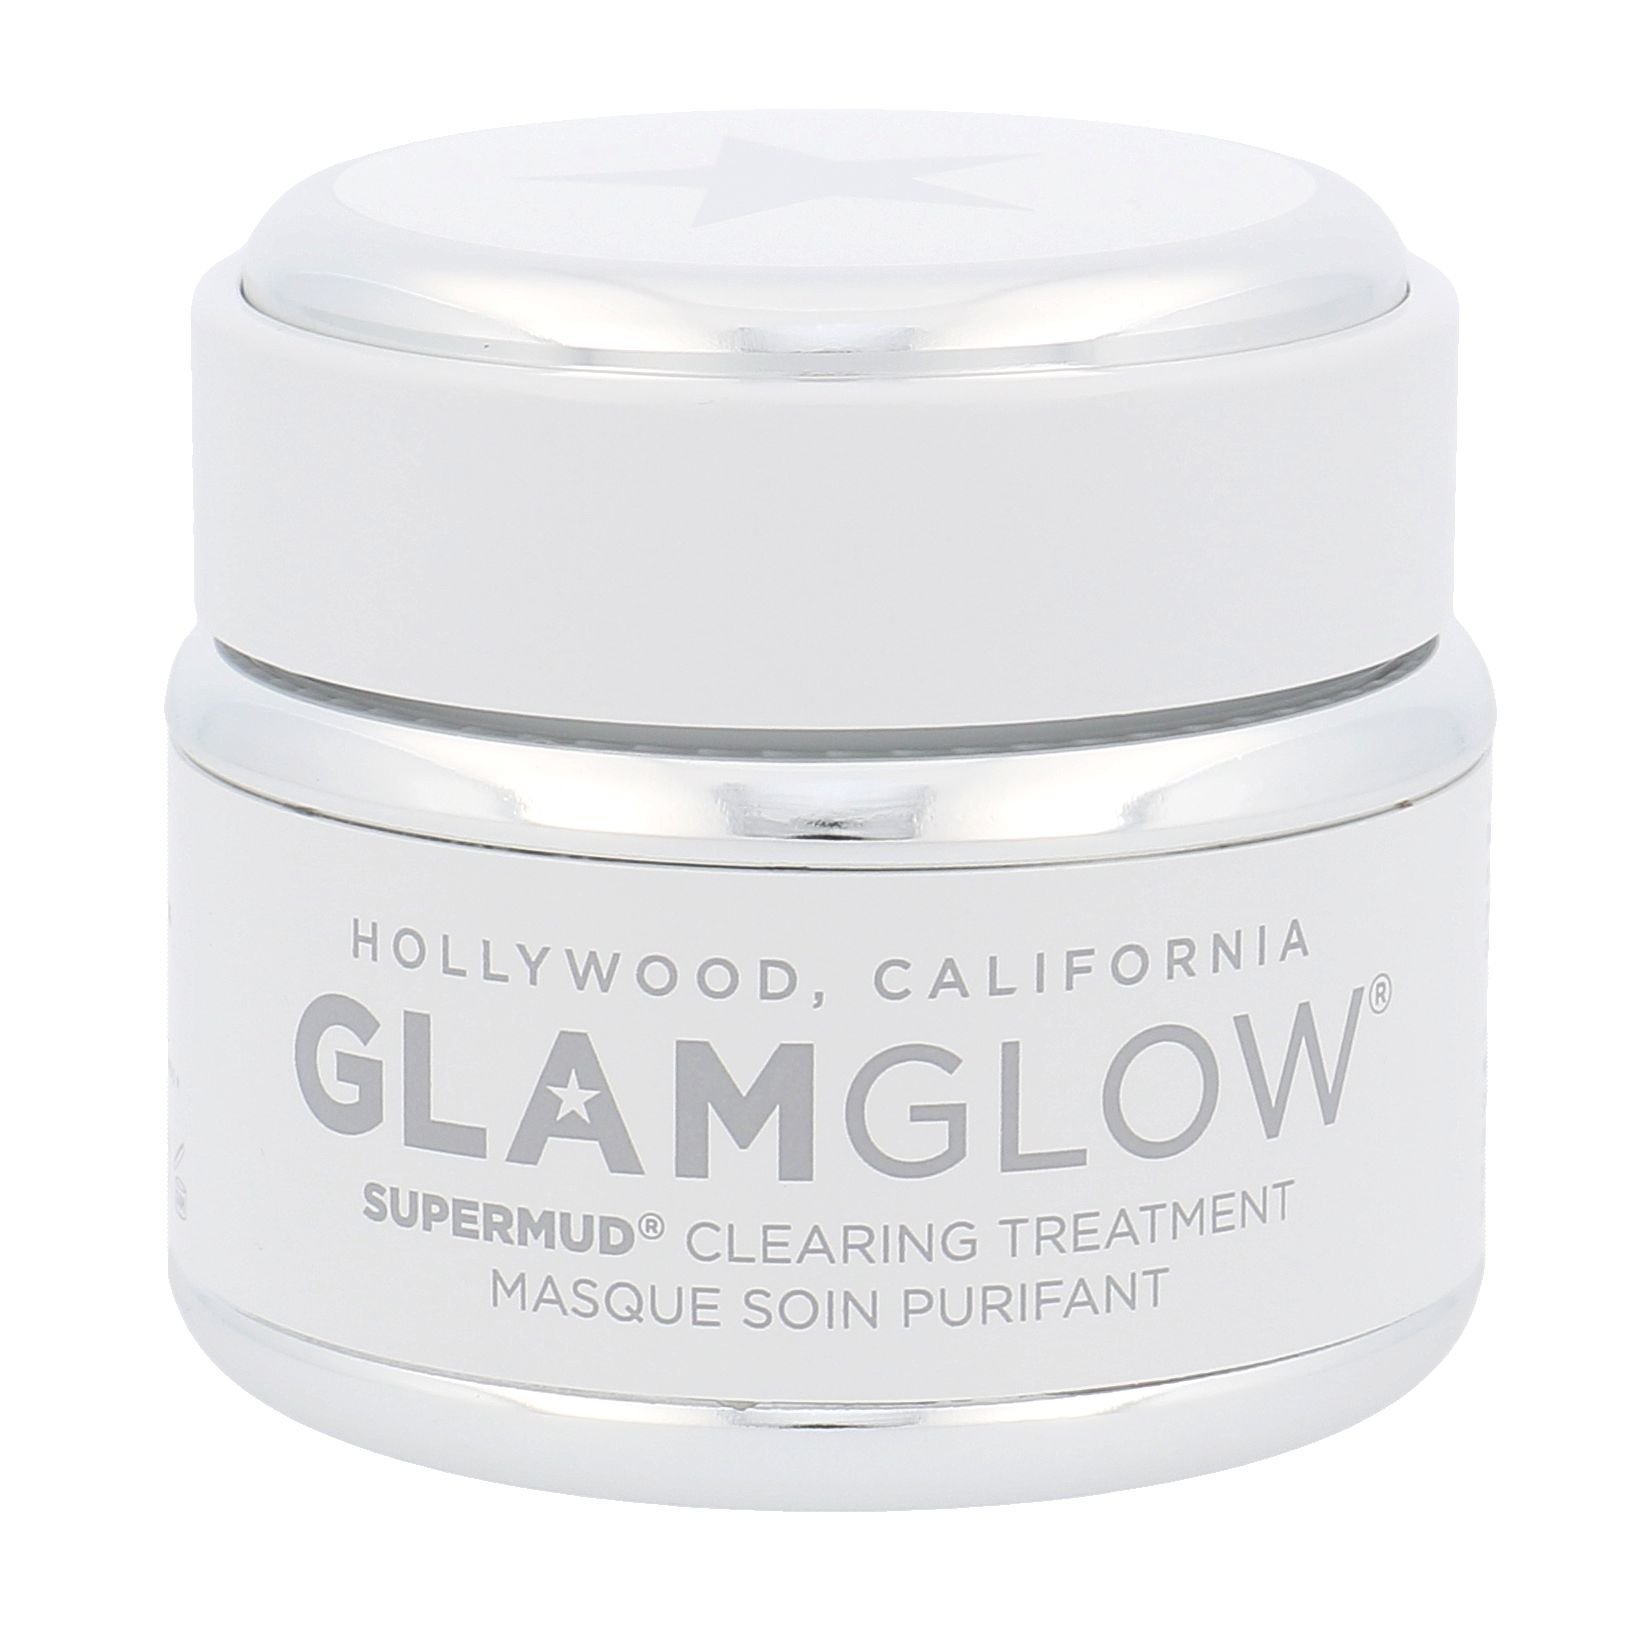 Glam Glow Supermud Clearing Treatment